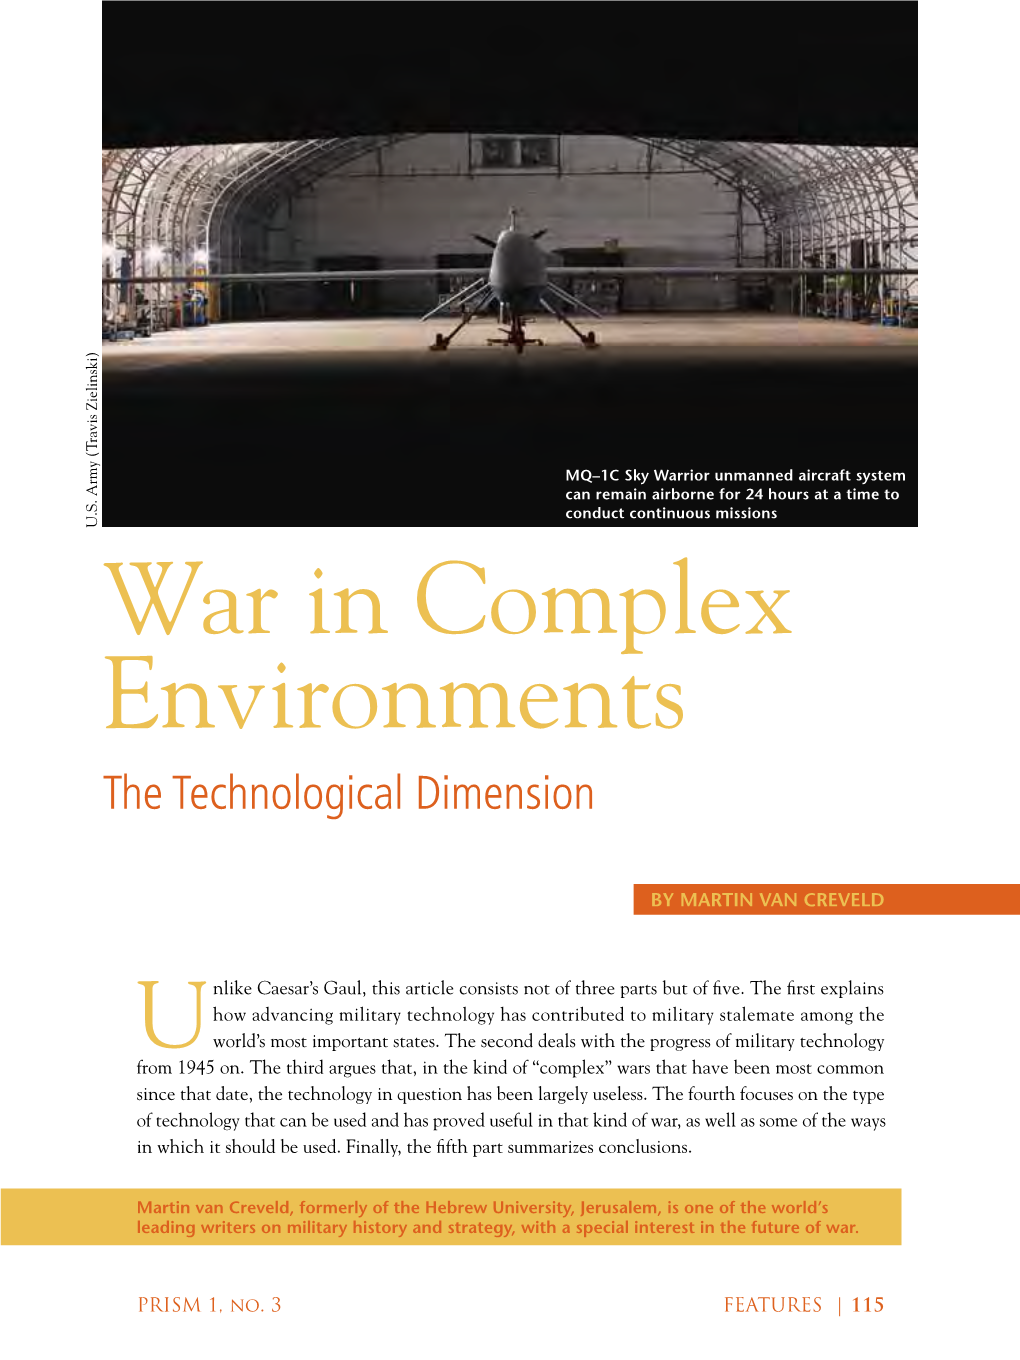 War in Complex Environments: the Technological Dimension